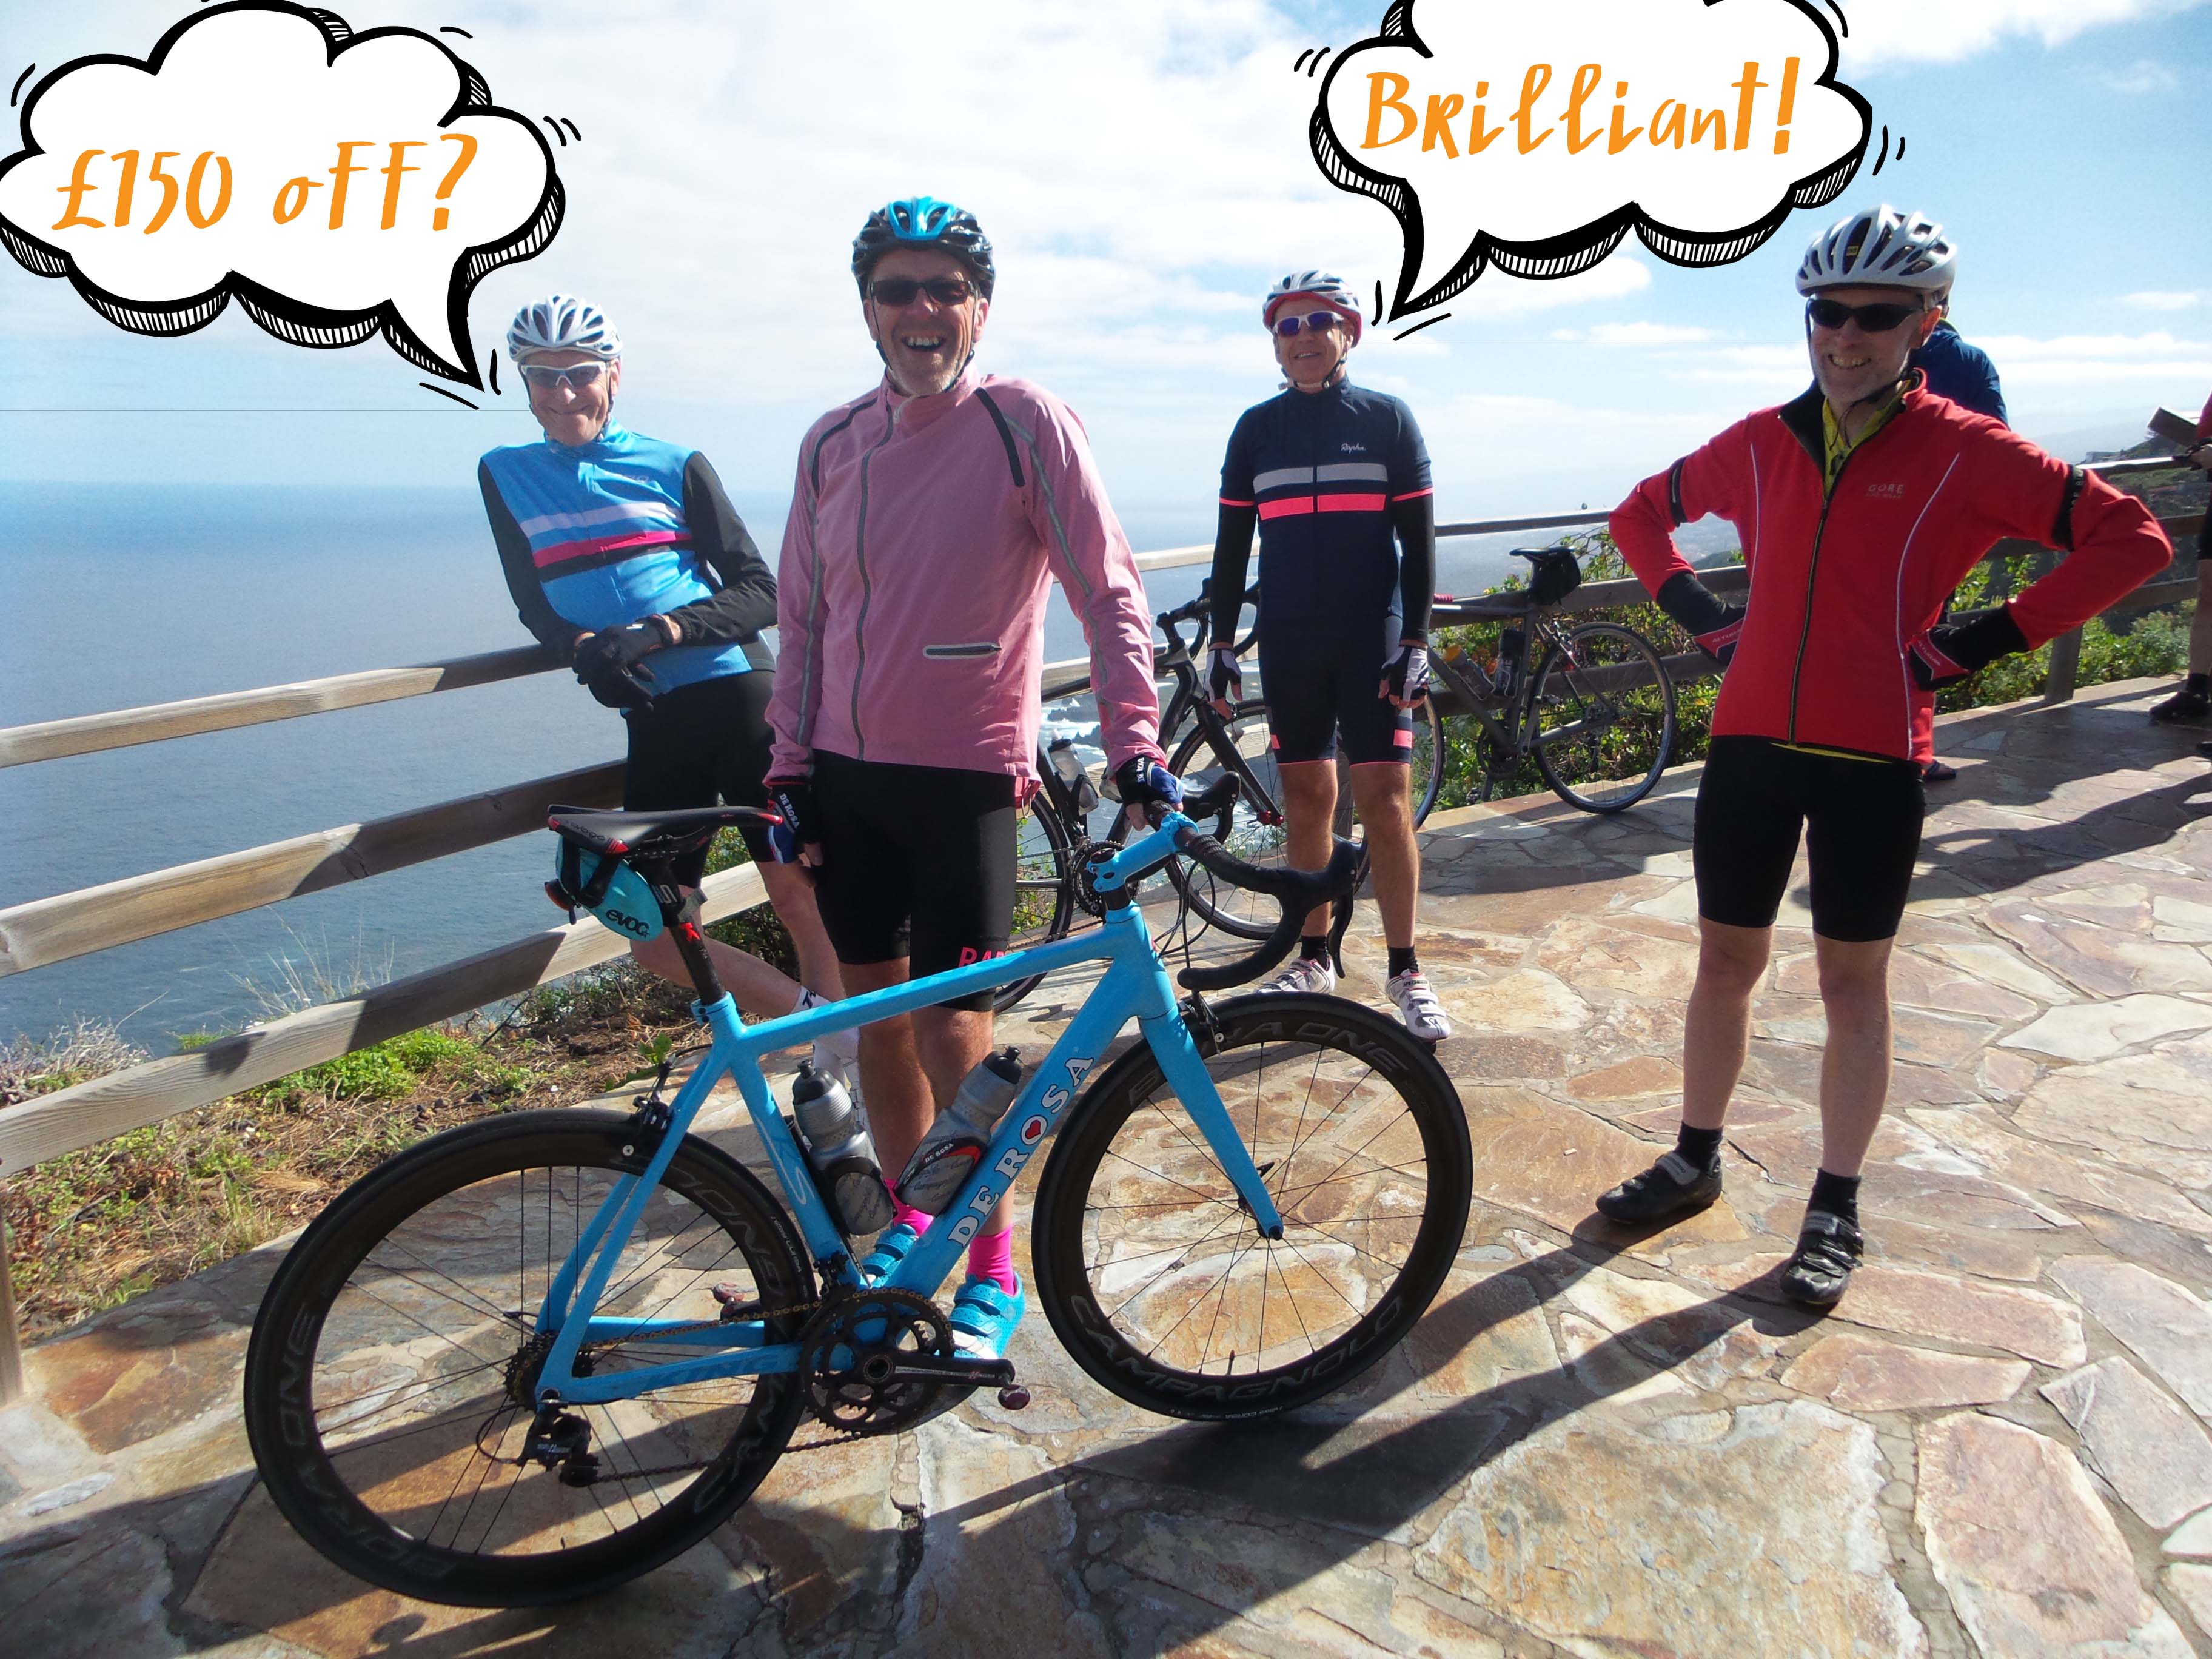 £150 off the Marmot Tours Classic Cols of Tenerife road cycling holiday